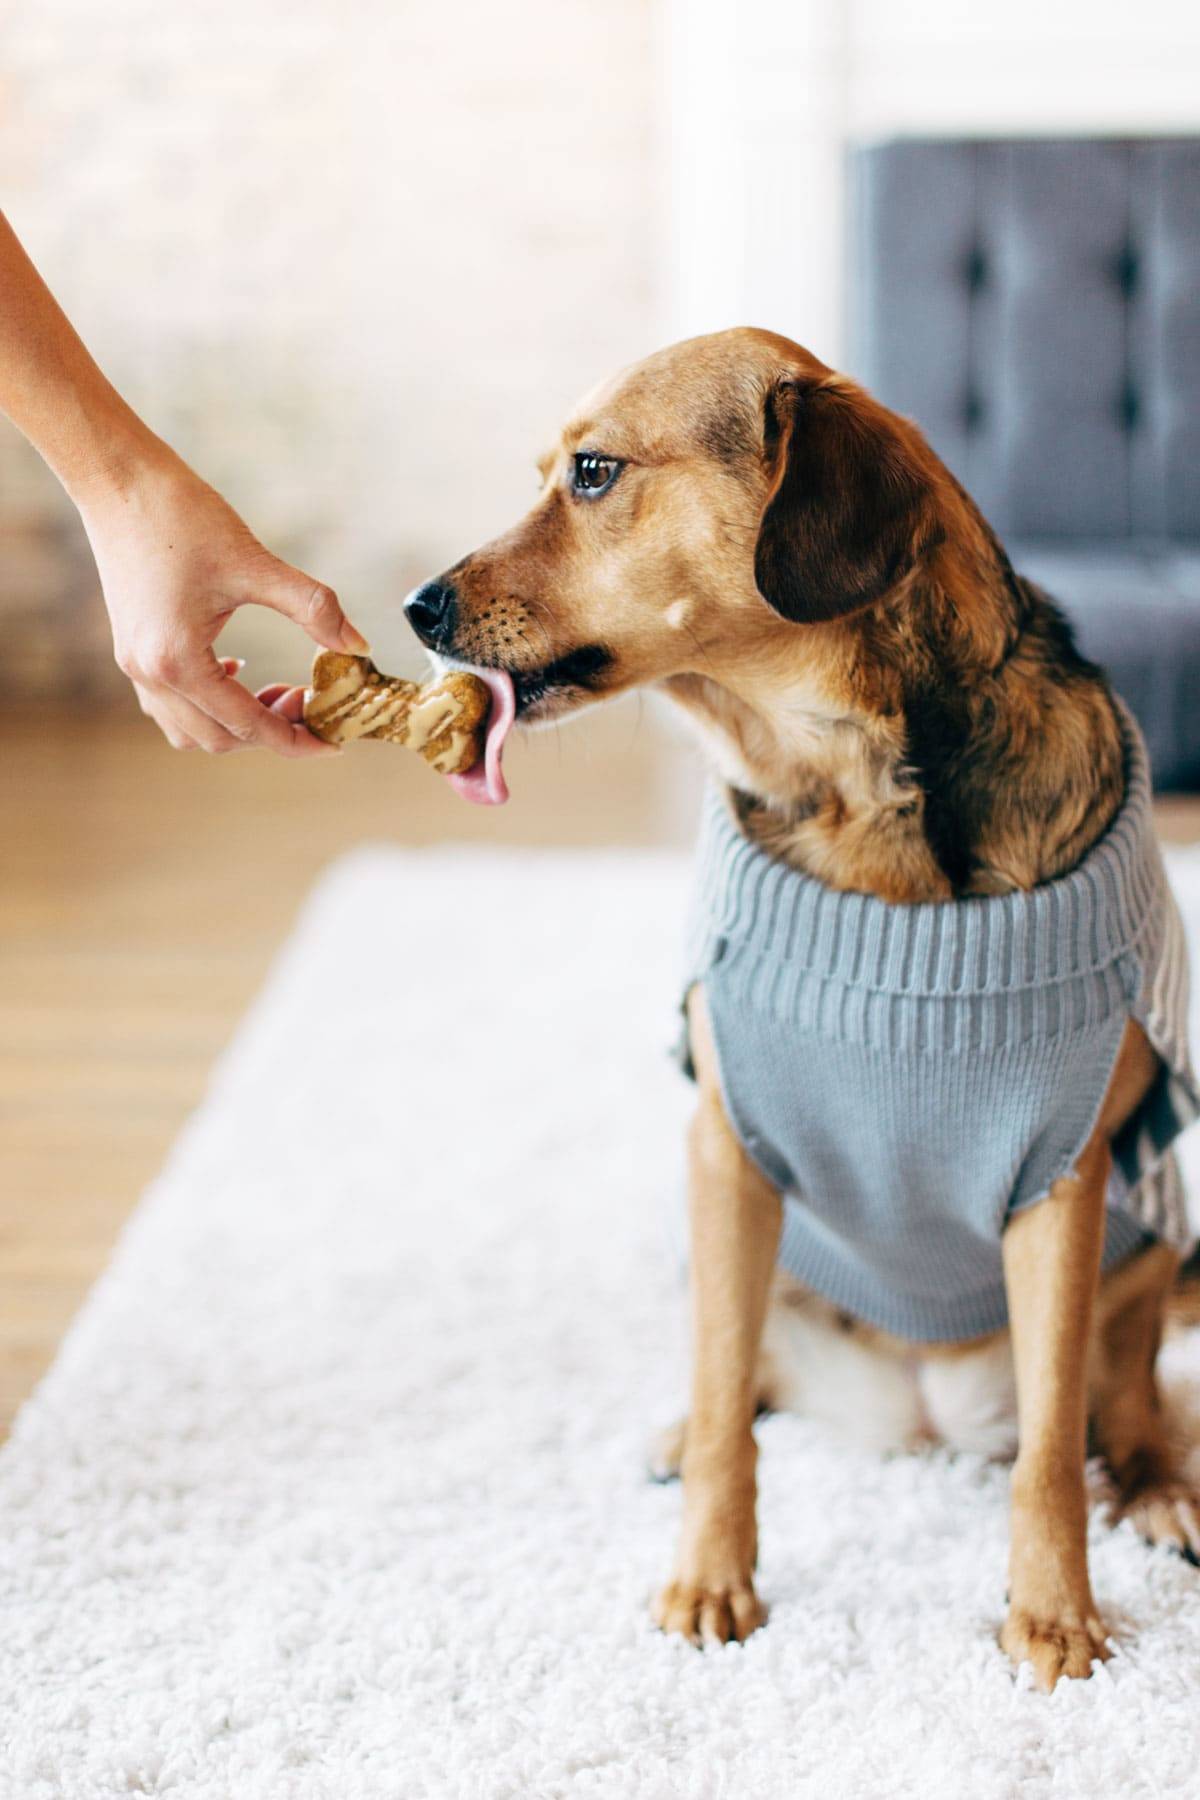 Homemade Dog Treats - 5 ingredient wholesome treats for your pup! | pinchofyum.com